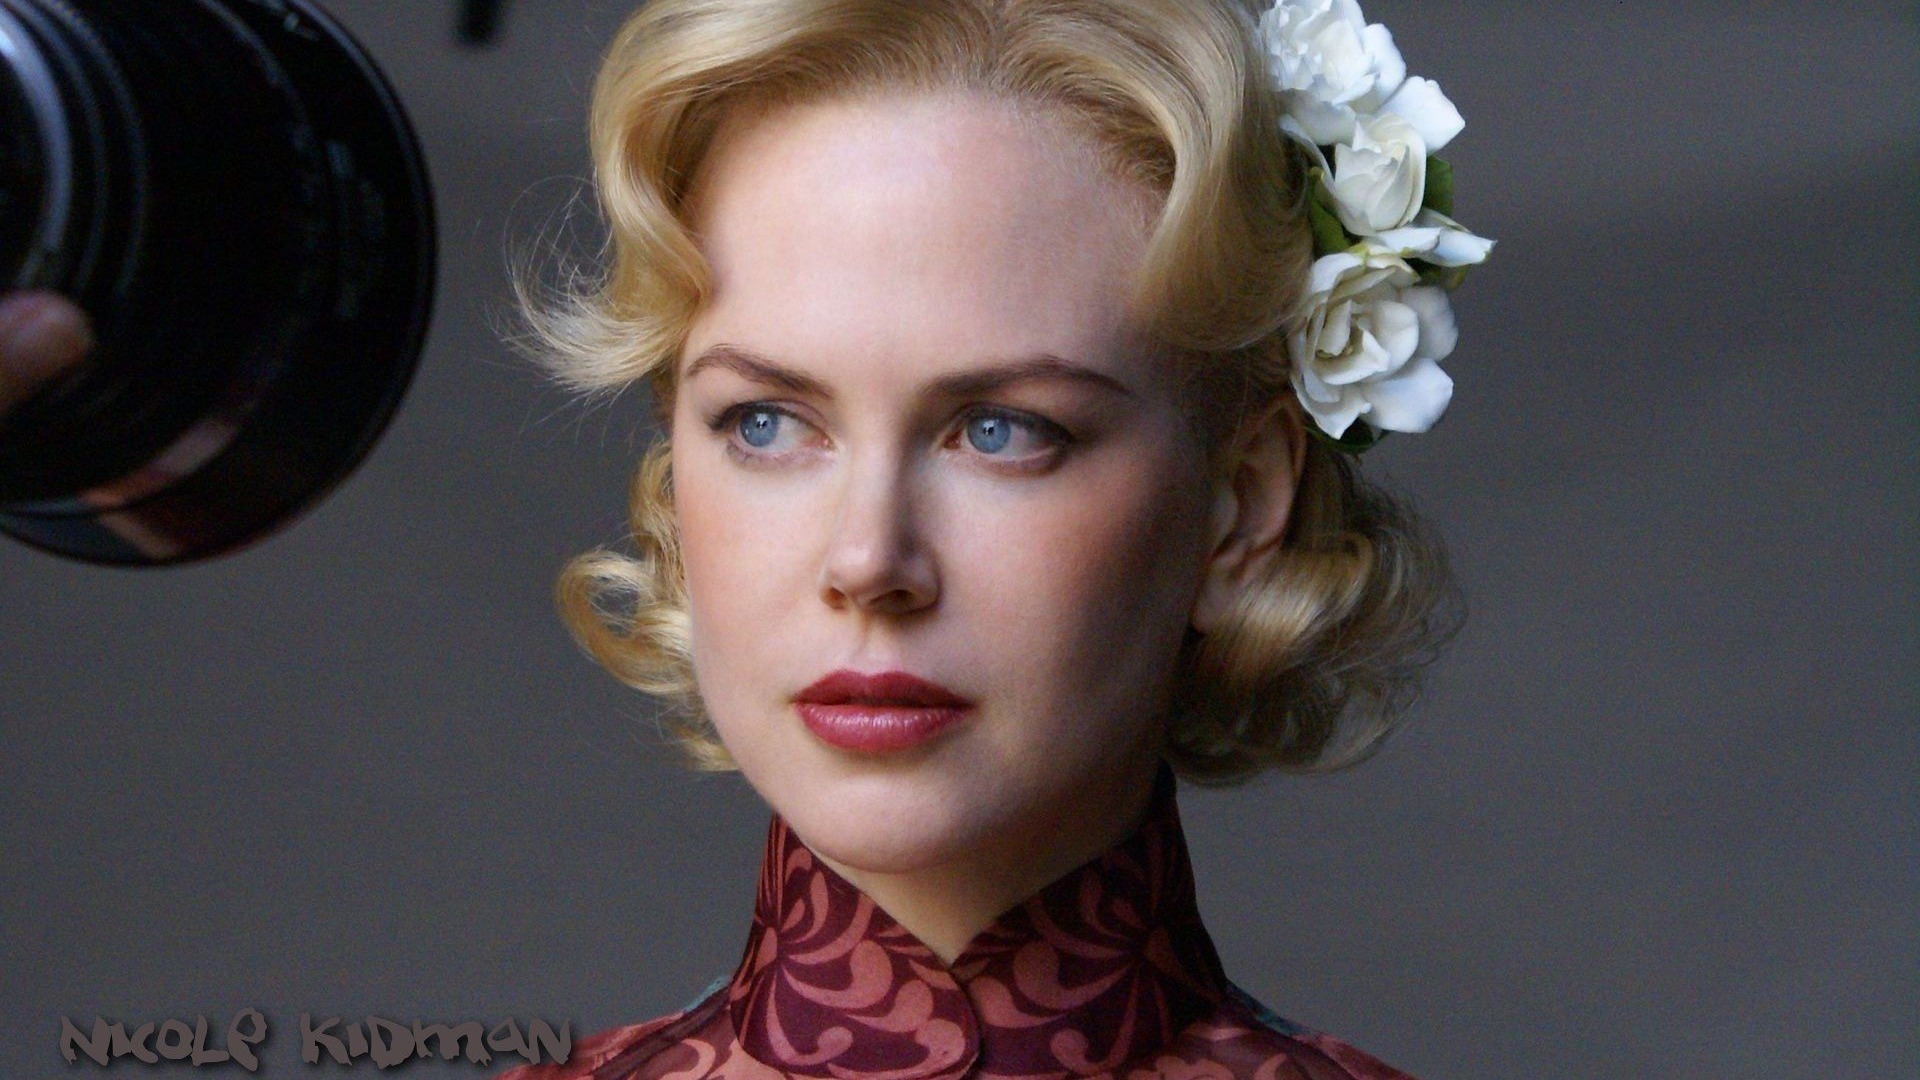 Nicole Kidman #002 - 1920x1080 Wallpapers Pictures Photos Images